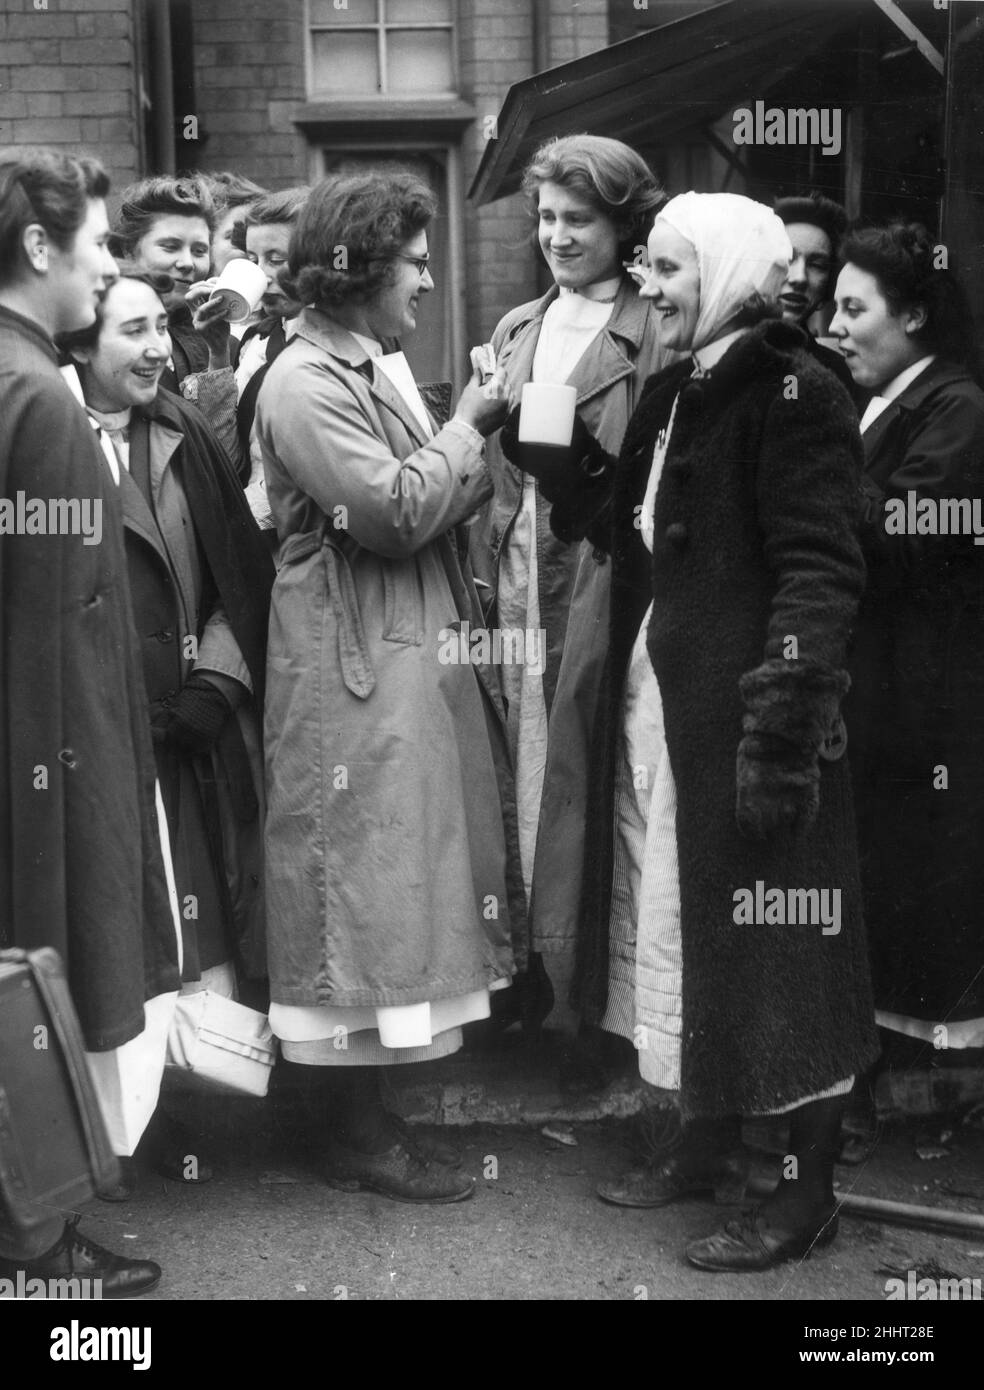 Nurses of Coventry and Warwick hopsital stop for a cup of tea in the voluntary canteen in the hospital grounds after their building was targeted by the German Luftwaffe in an air raid during the Second World War.10th April 1941. Stock Photo